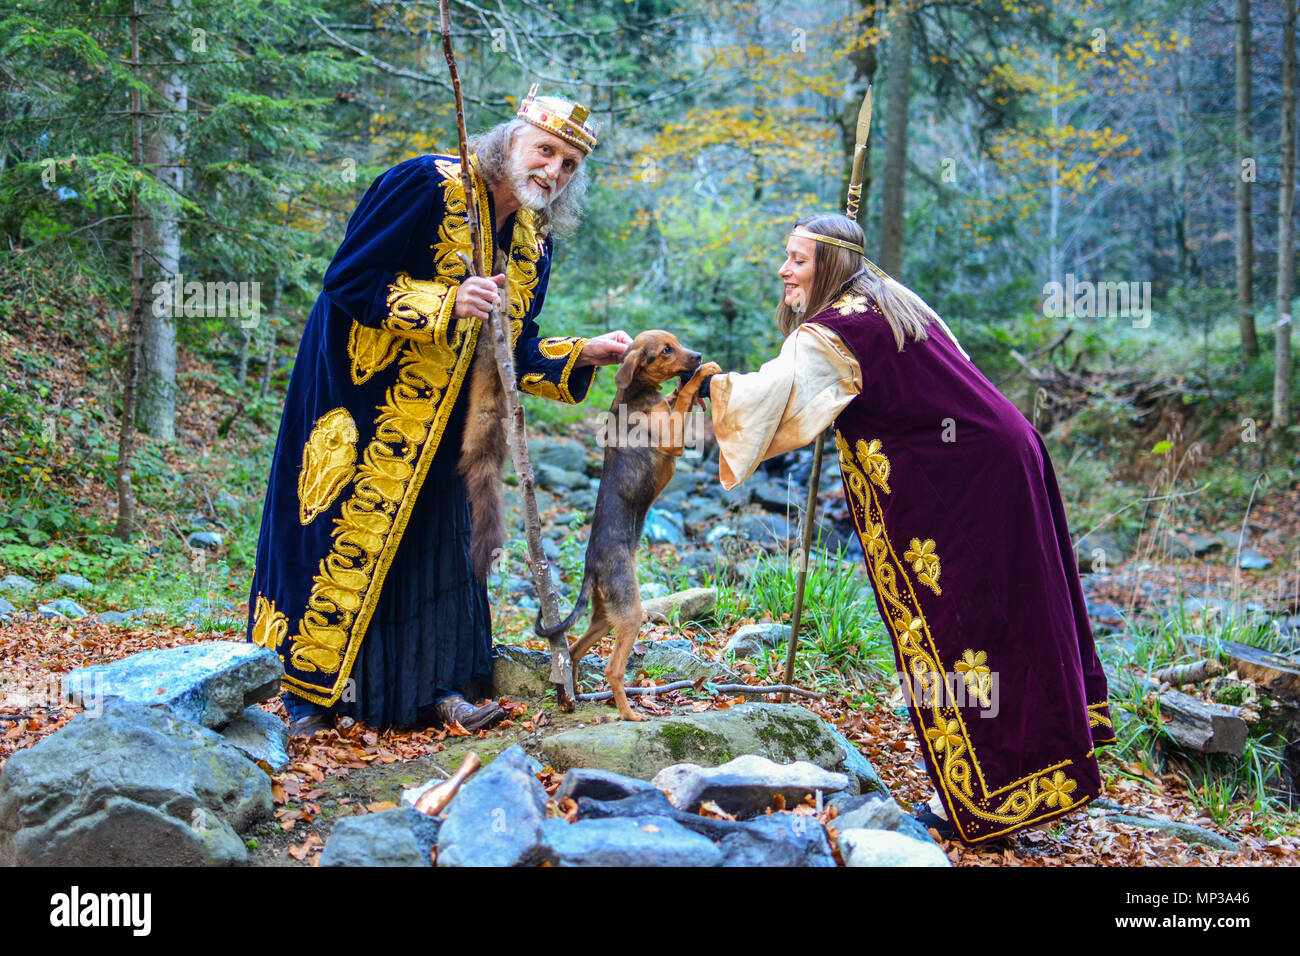 The old king, a queen having funwith small hunting dog outdoors in colourful autumn forest Stock Photo